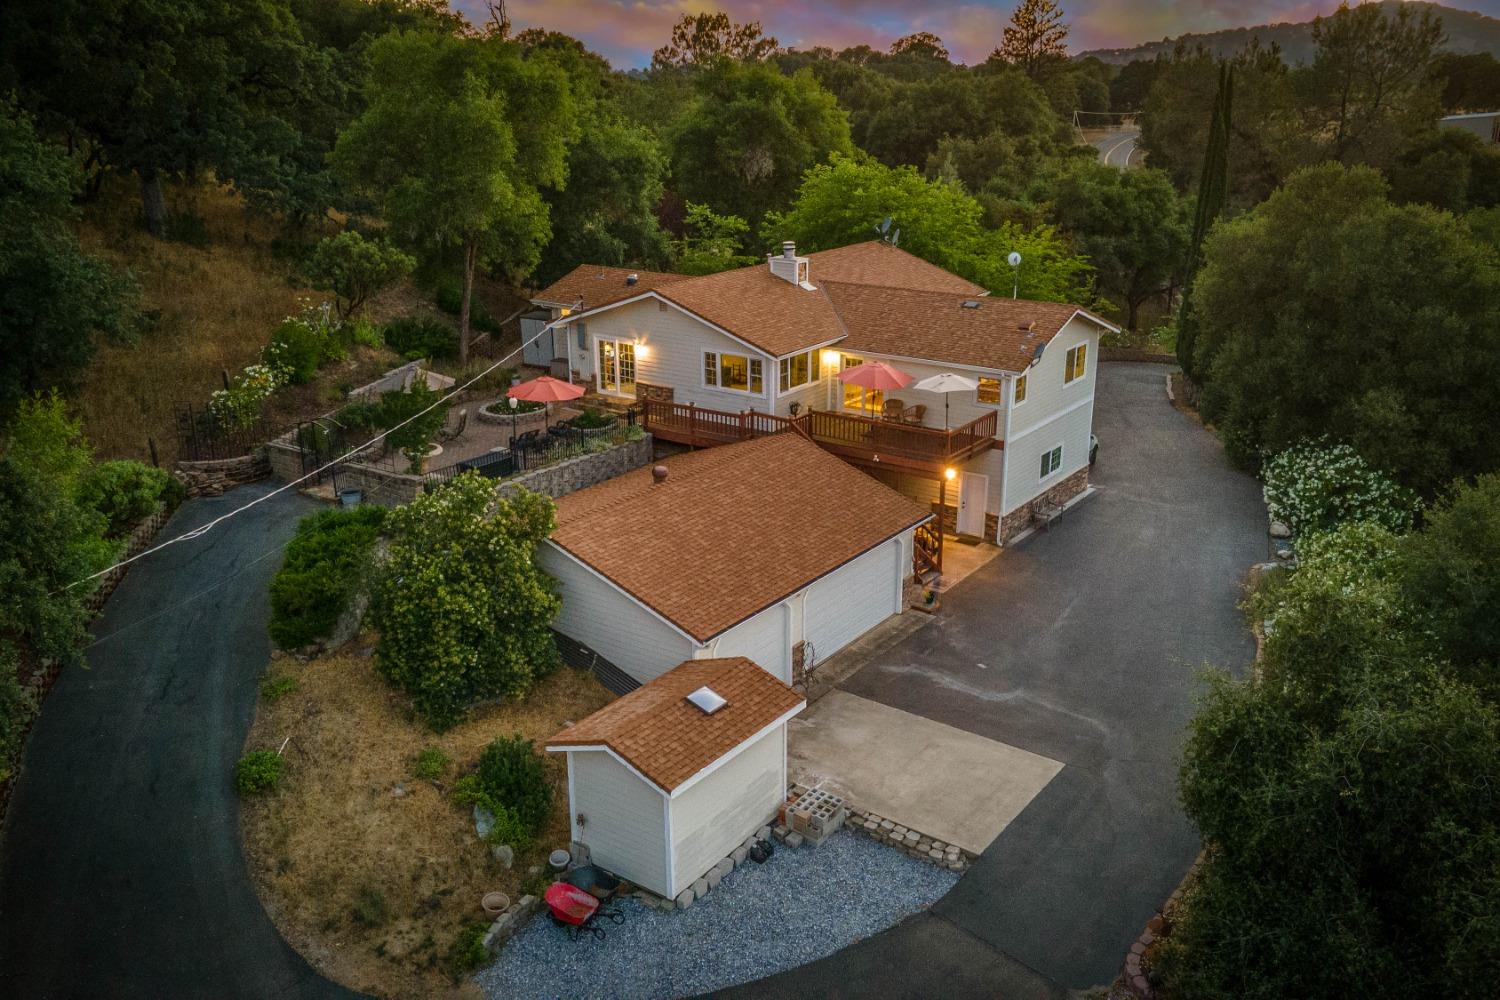 Photo of 1244 Cold Springs Rd in Placerville, CA